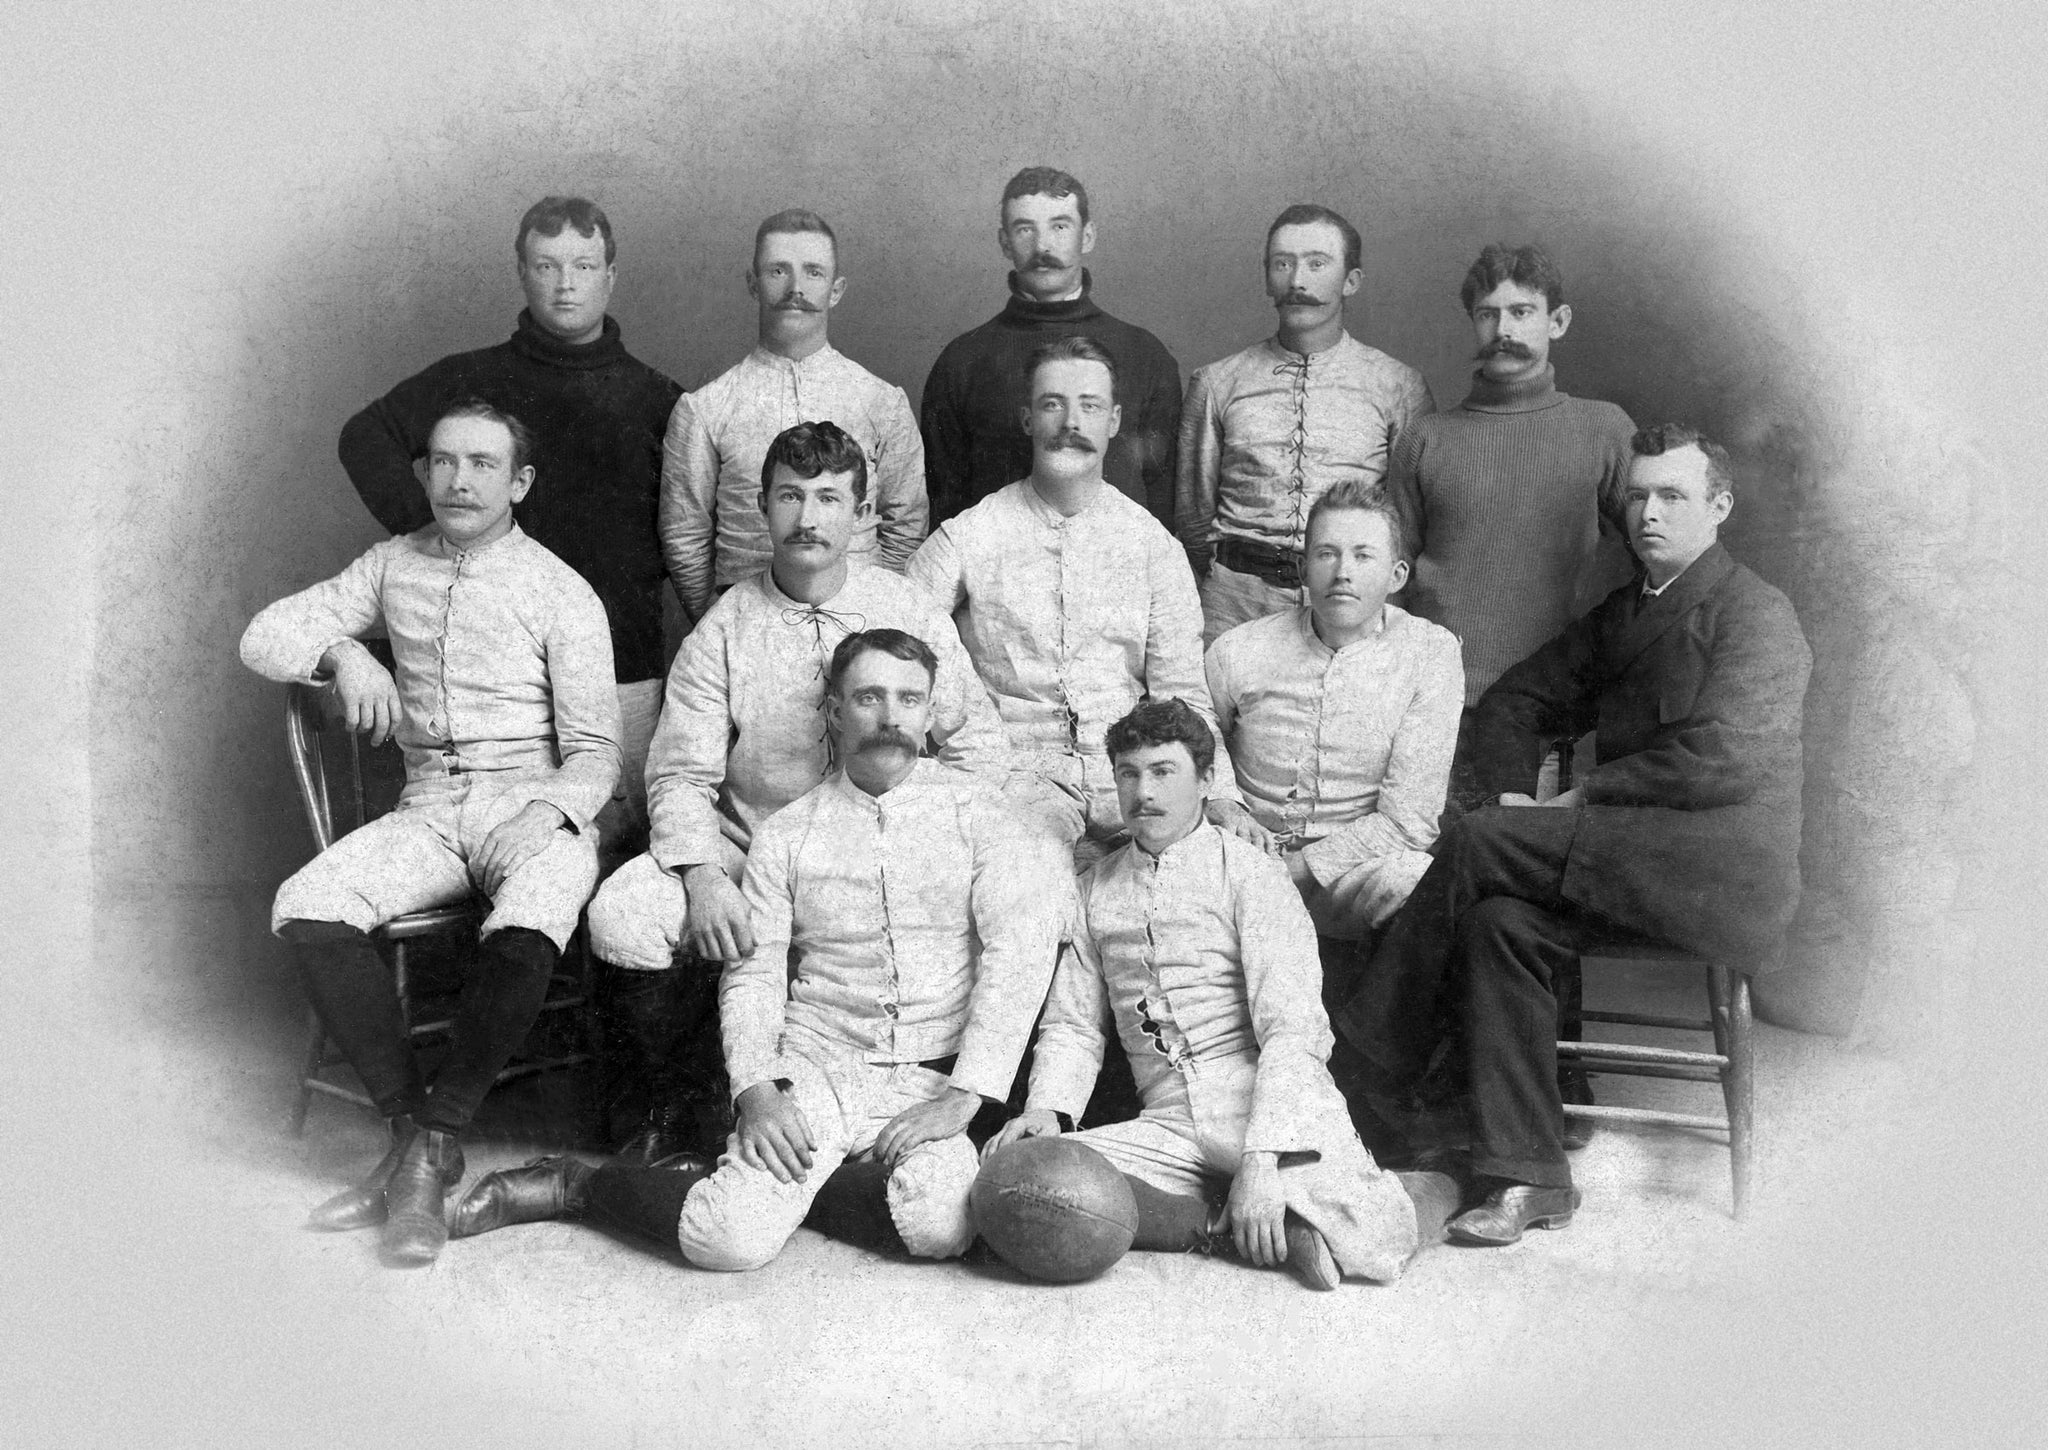 The Farragut Athletic Club football team, circa 1895. Those identified are Ed Cavanaugh, Charles Lee, Thomas McGuire, Joseph McEnry, George Burnap, John Hurley, John Scully, Joseph Walsh, J. W. Cavanaugh, P. W. Brown, and P. Bagan. -- Courtesy of the Vallejo Naval and Historical Museum